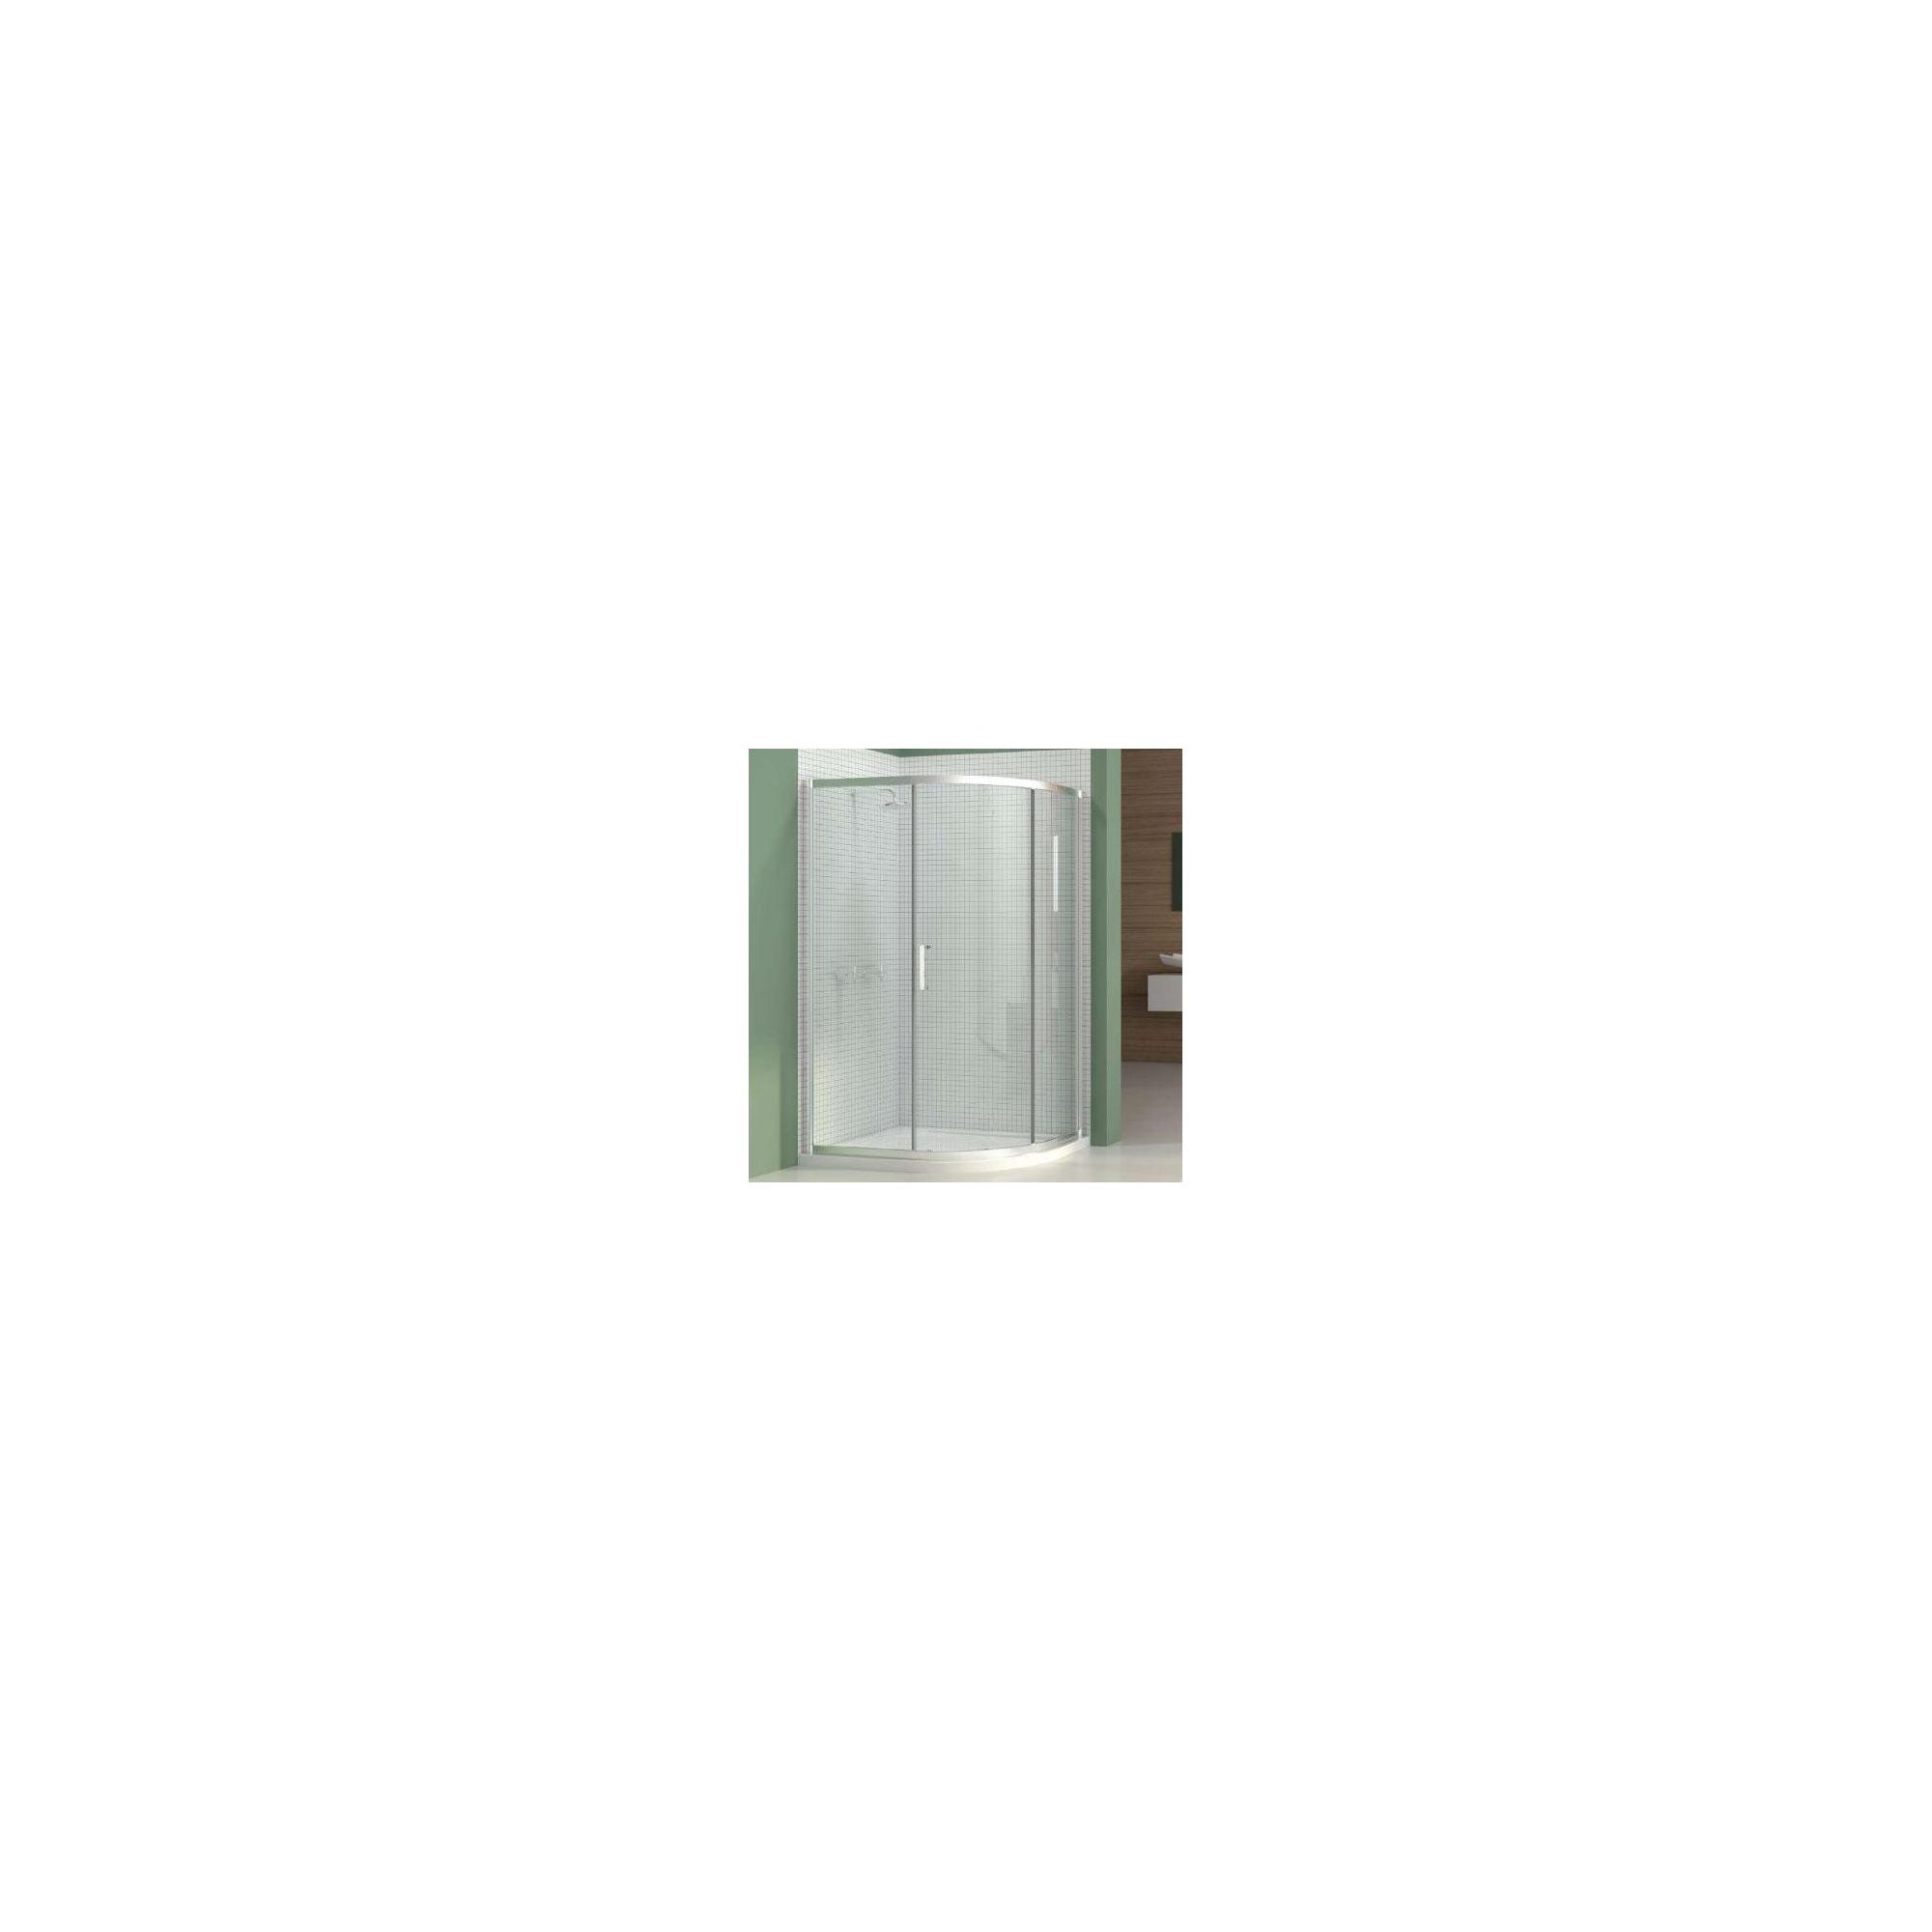 Merlyn Vivid Six Offset Quadrant Shower Enclosure, 1000mm x 800mm, Right Handed, Low Profile Tray, 6mm Glass at Tesco Direct